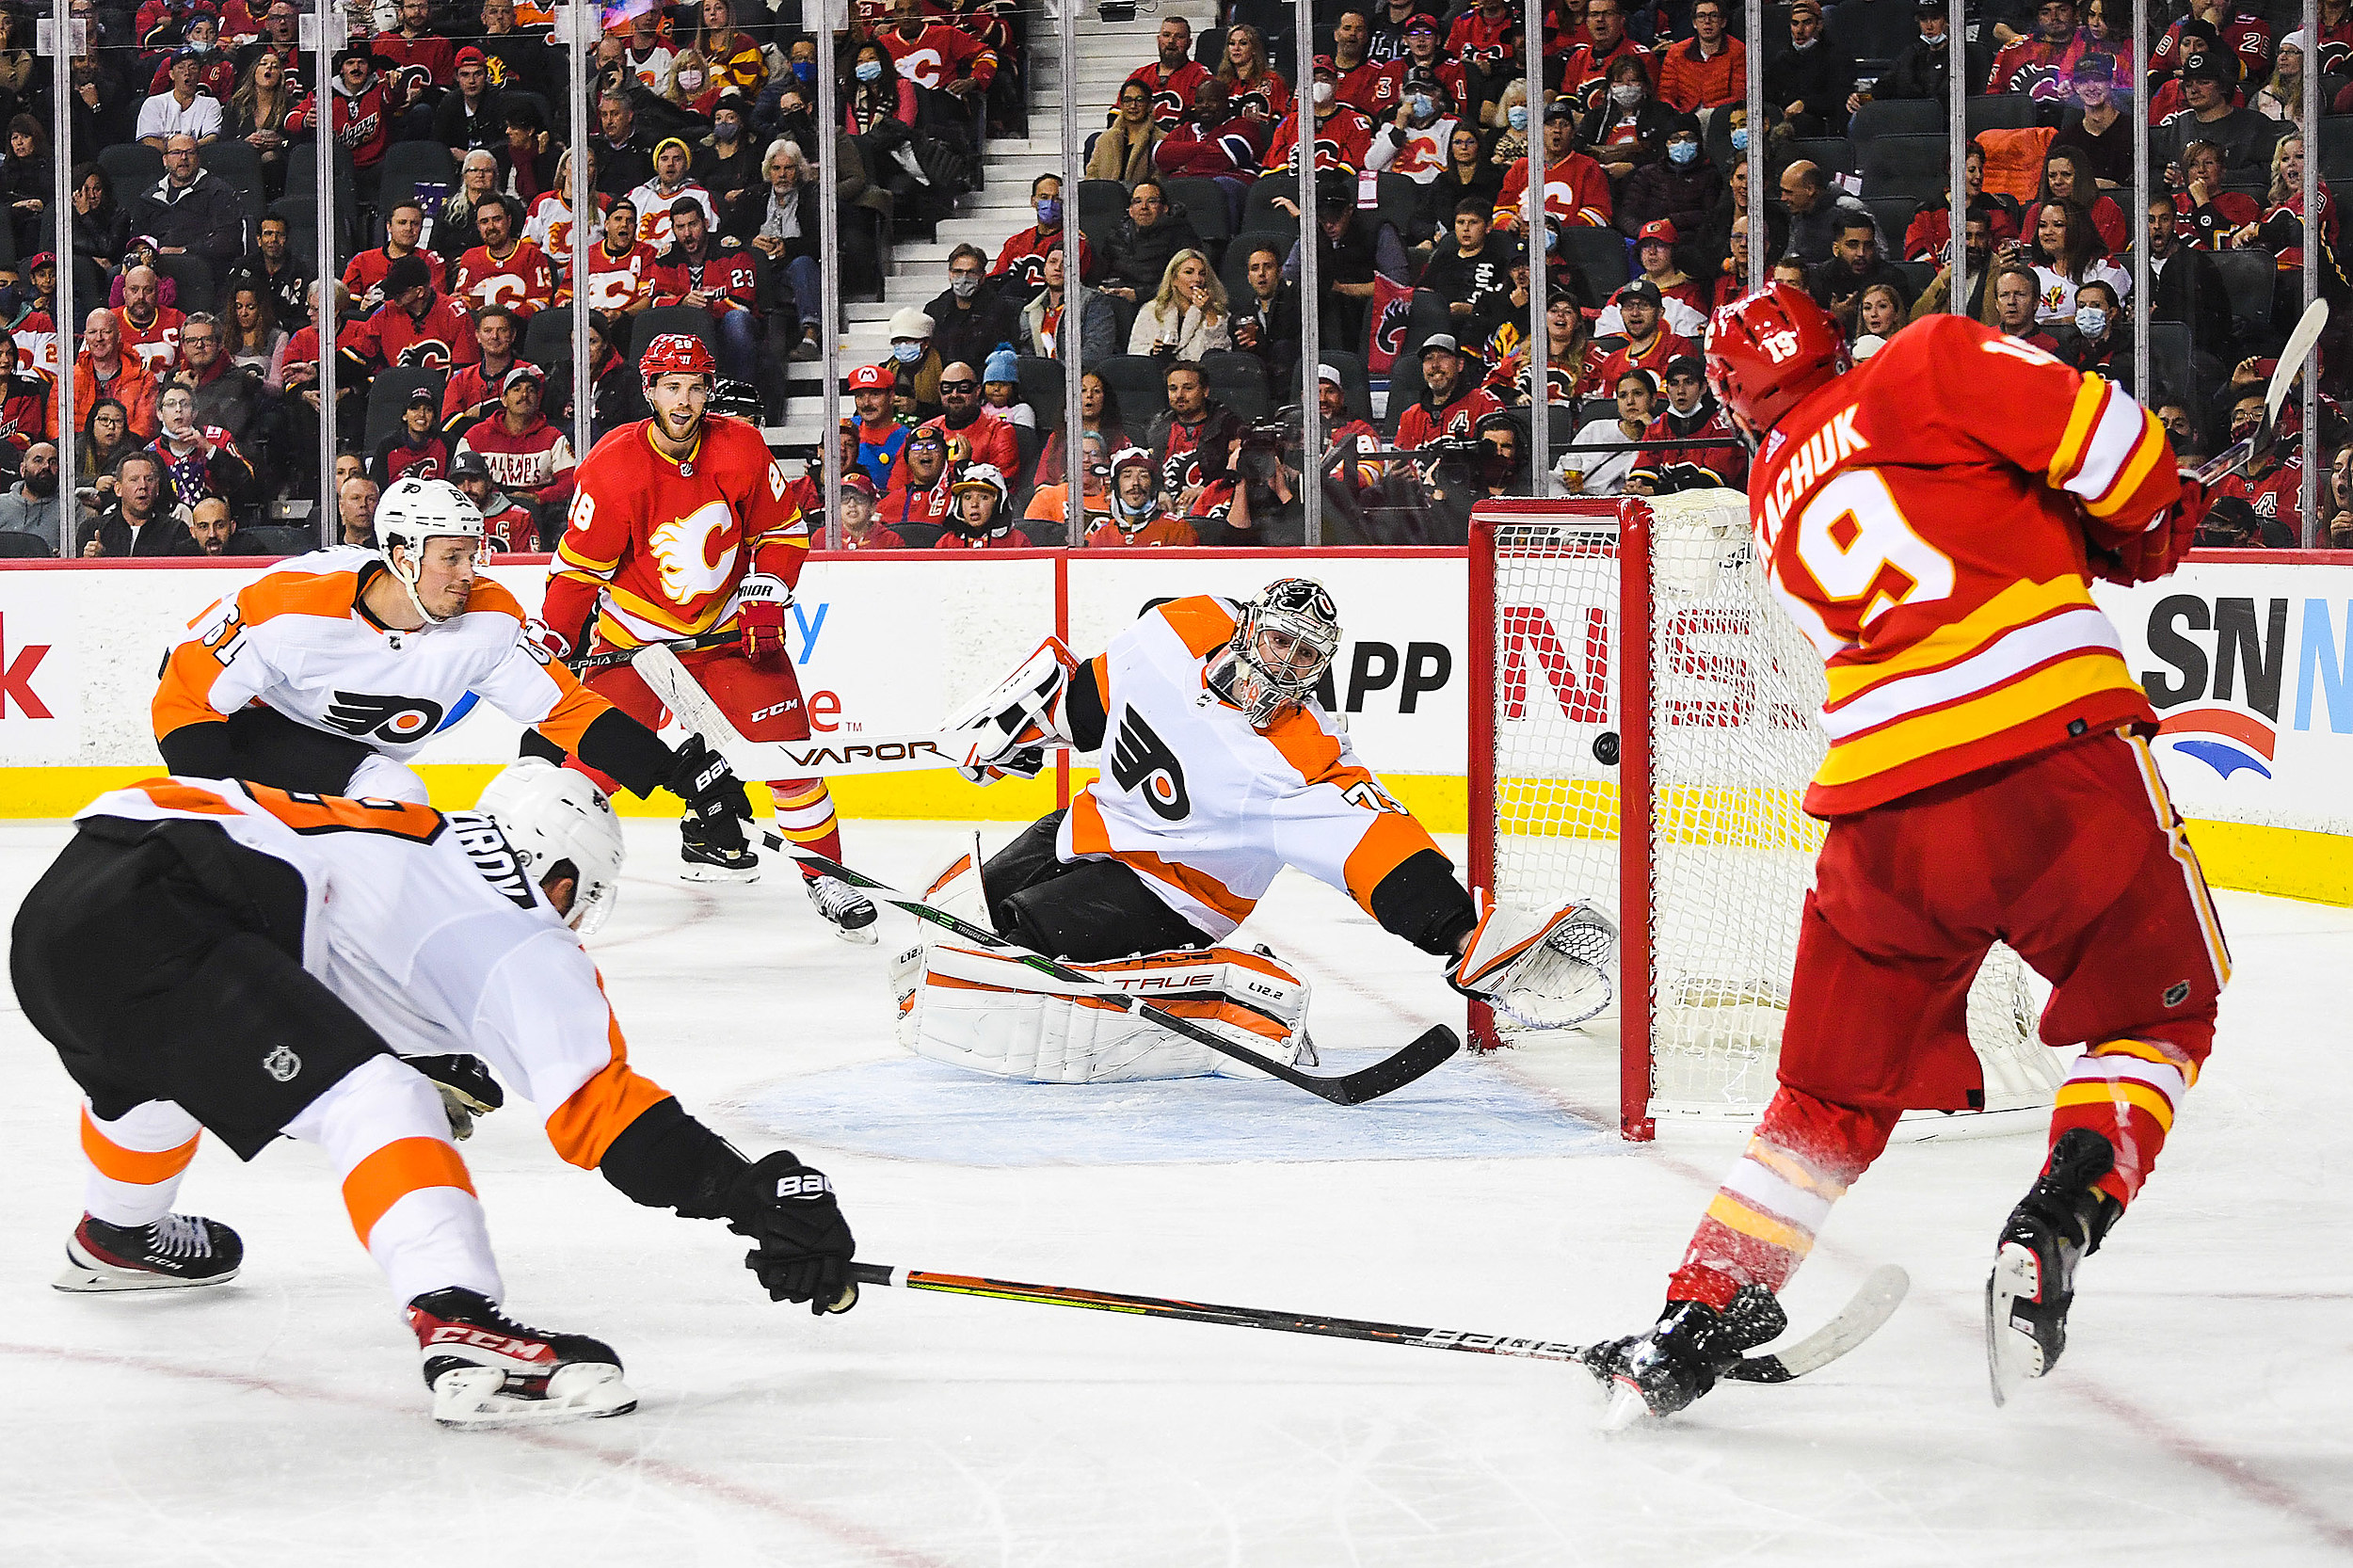 LOOK: Flames Reverse Retro Jersey: Flyers Bring Back Cooperalls